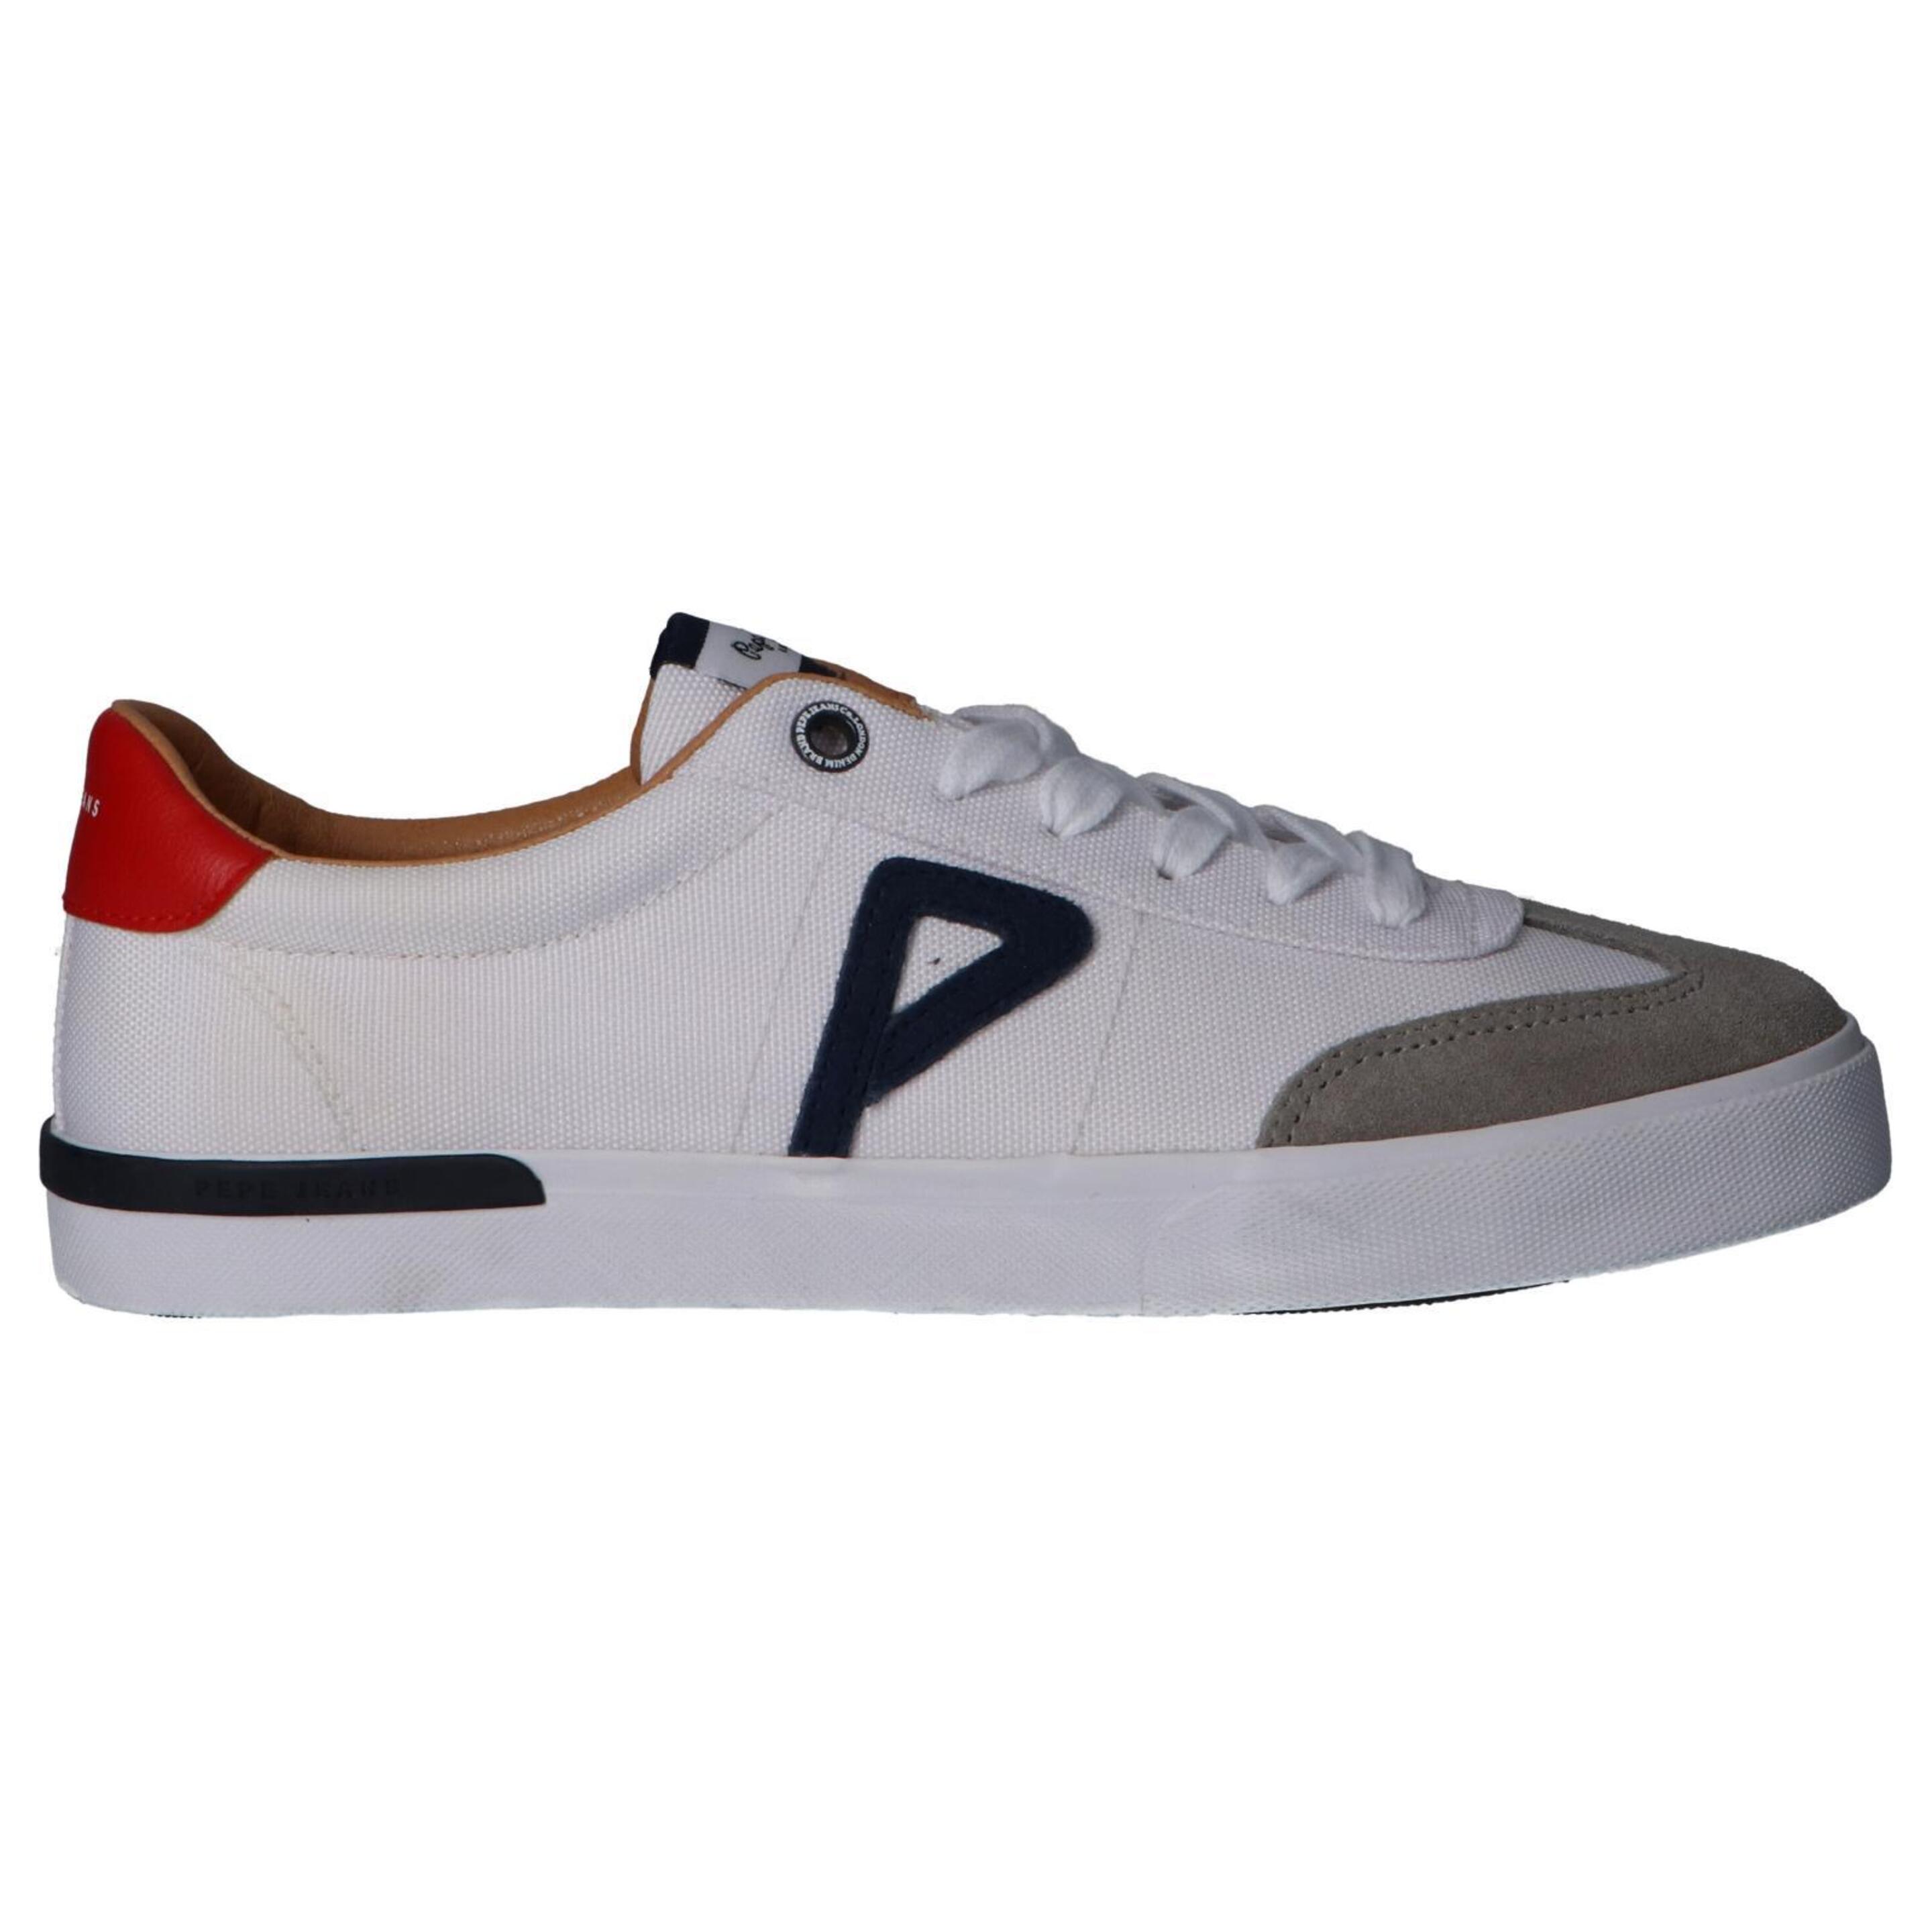 Deportivas Pepe Jeans Pms30532 North Archive